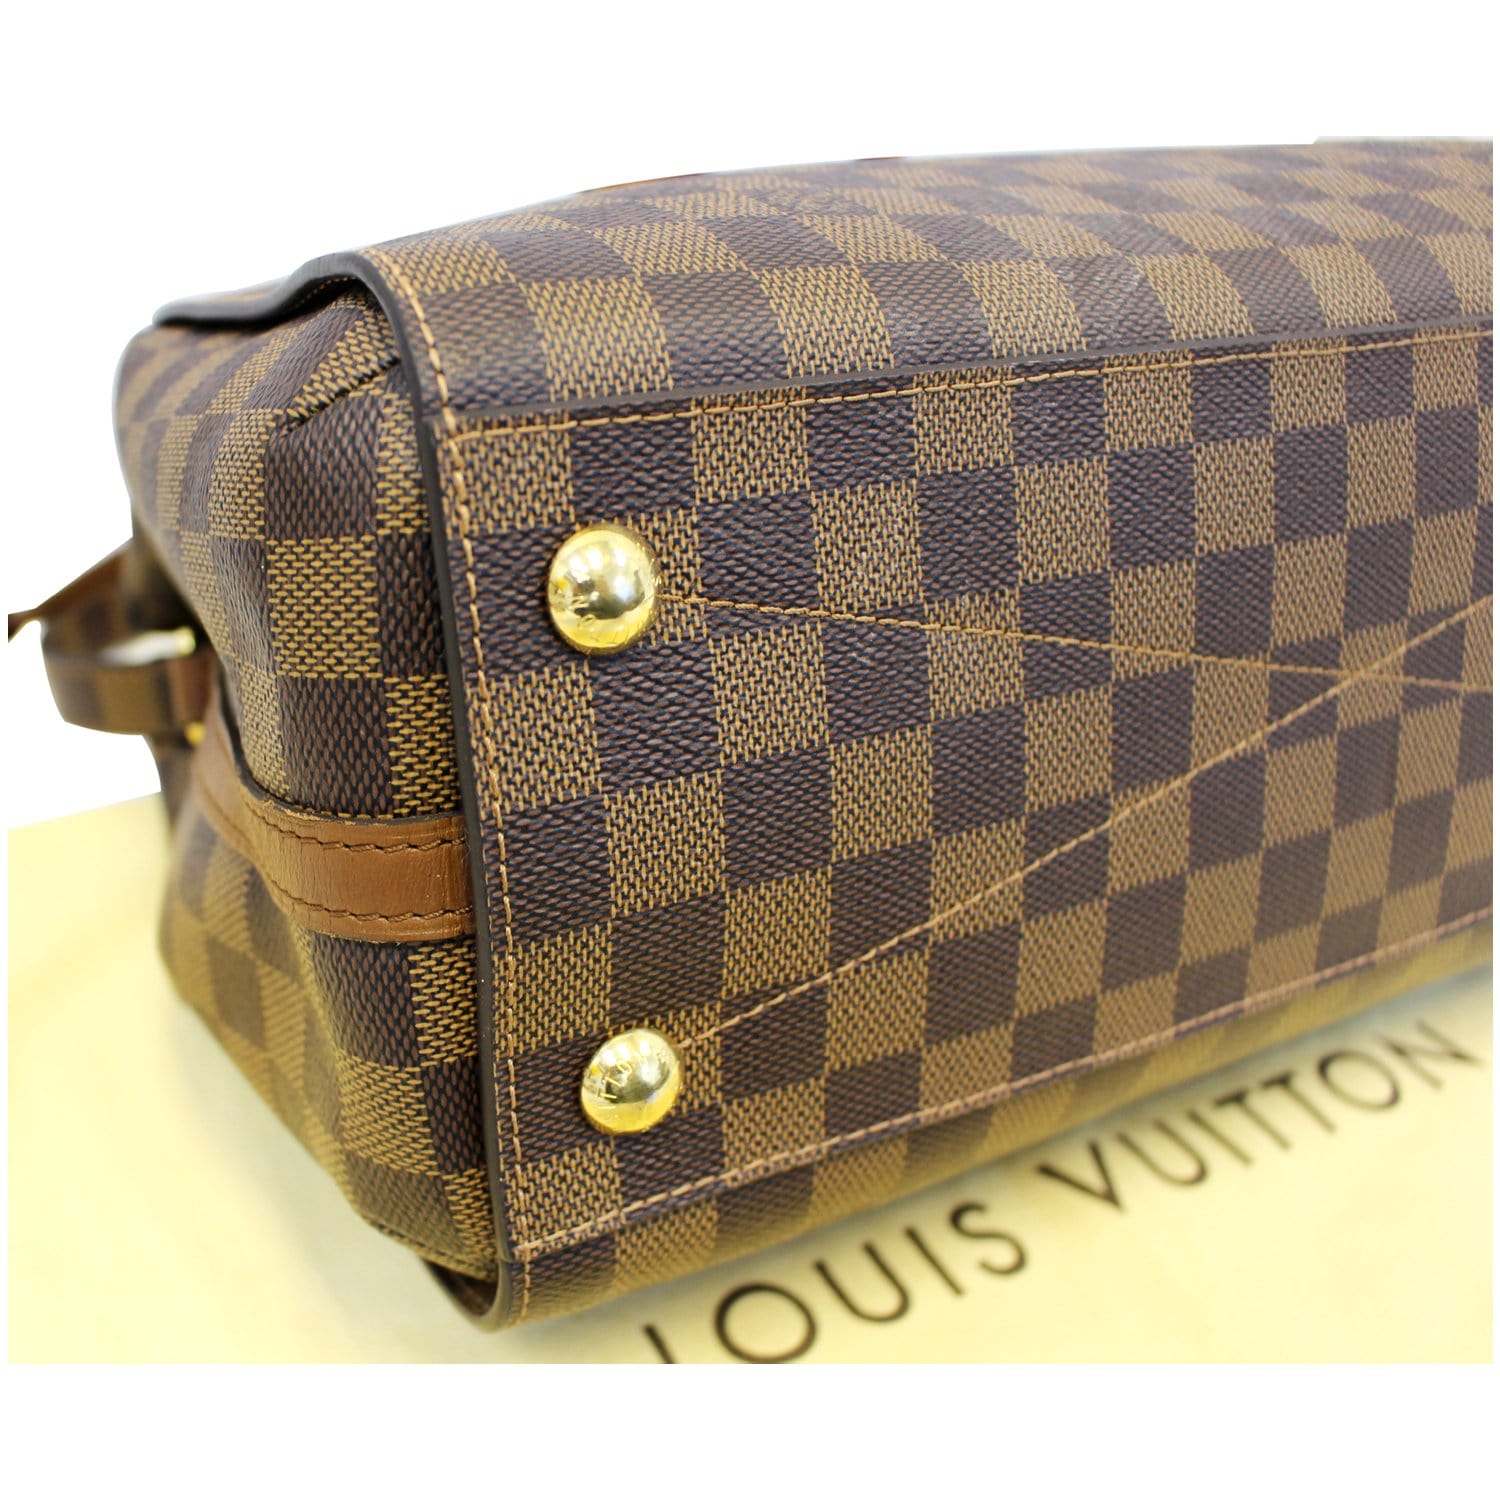 The Louis Vuitton Greenwich. A rare find in this condition. #louisvuit